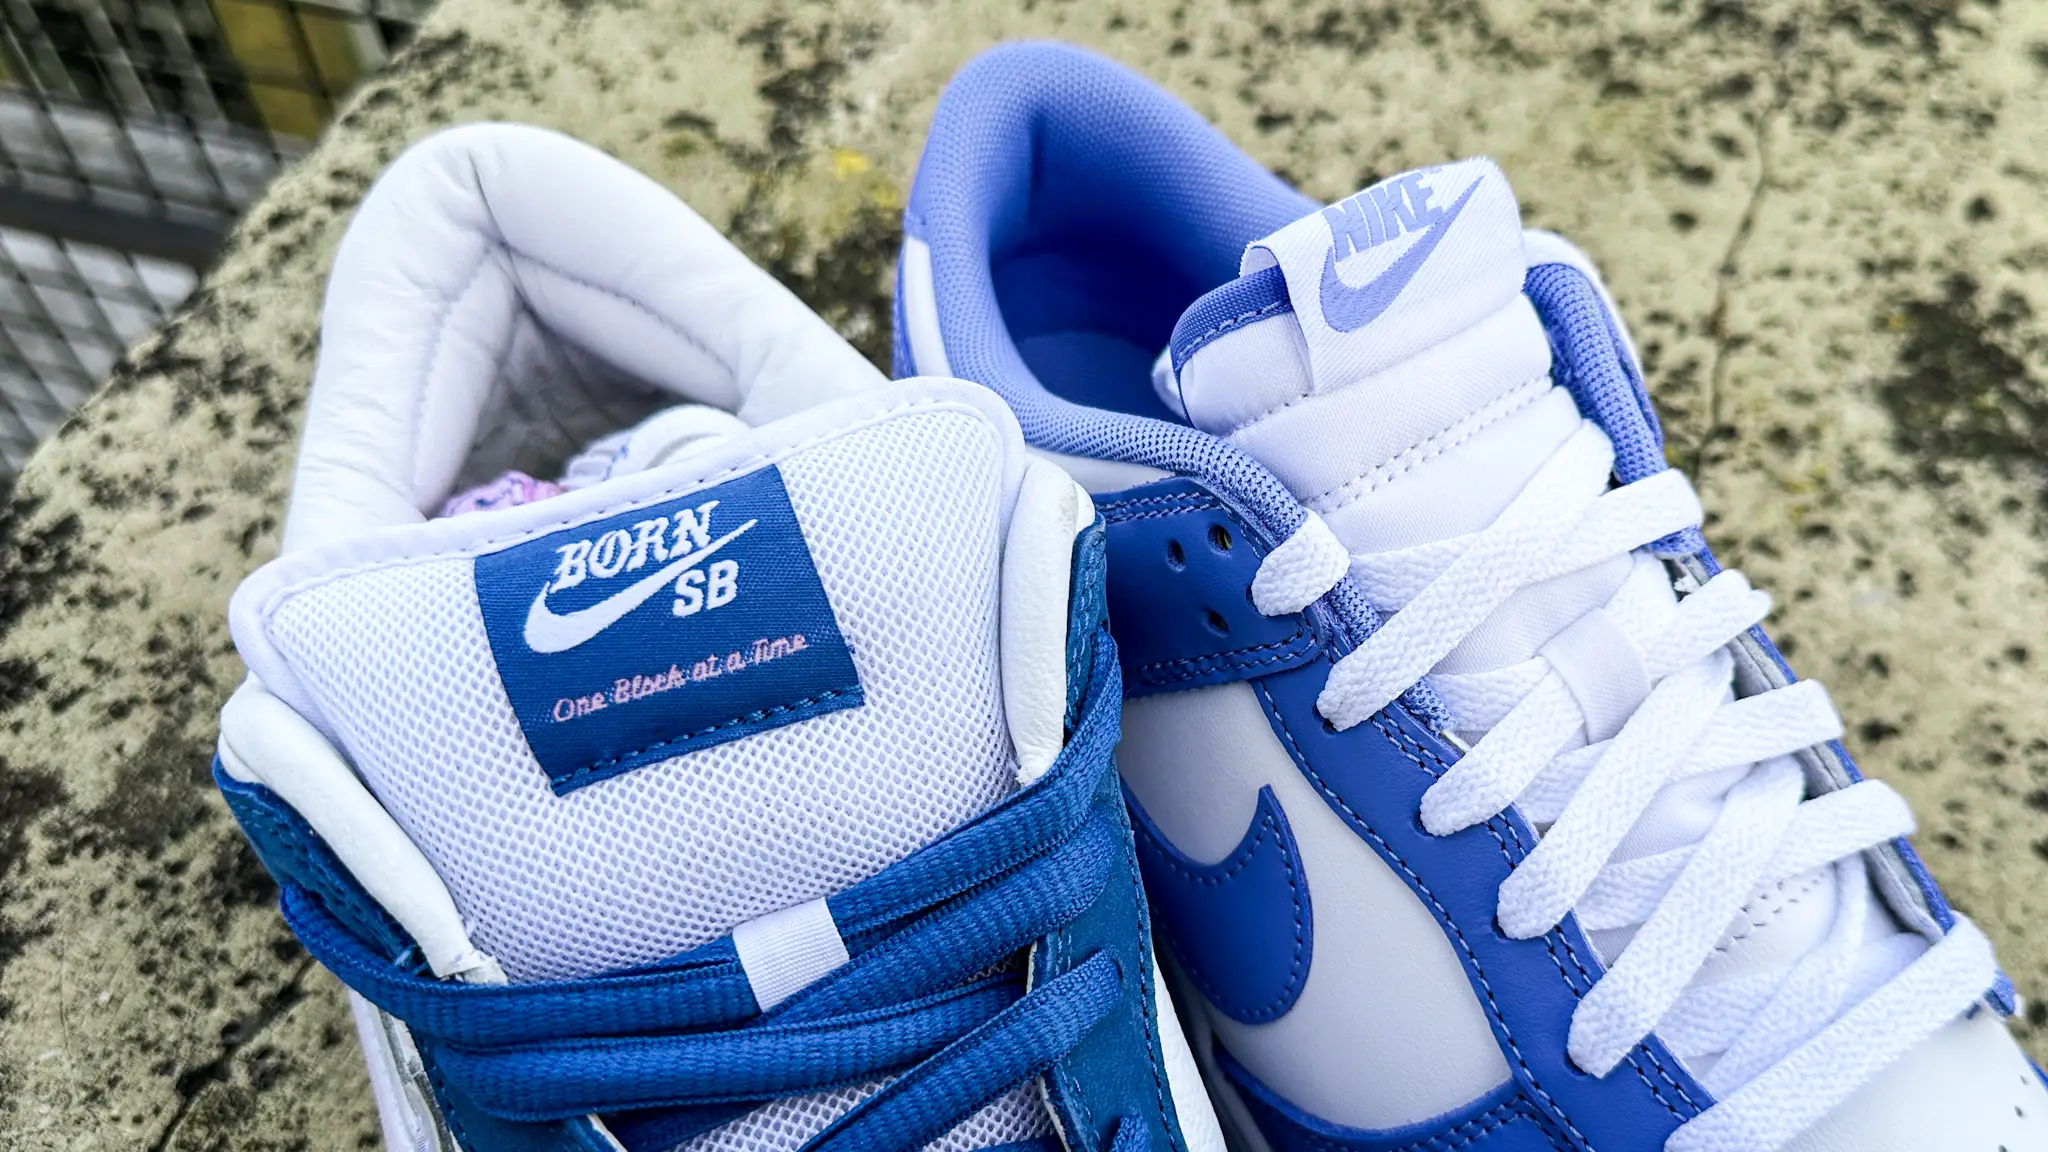 What's The Difference Between The Nike Dunk & Nike SB Dunk?